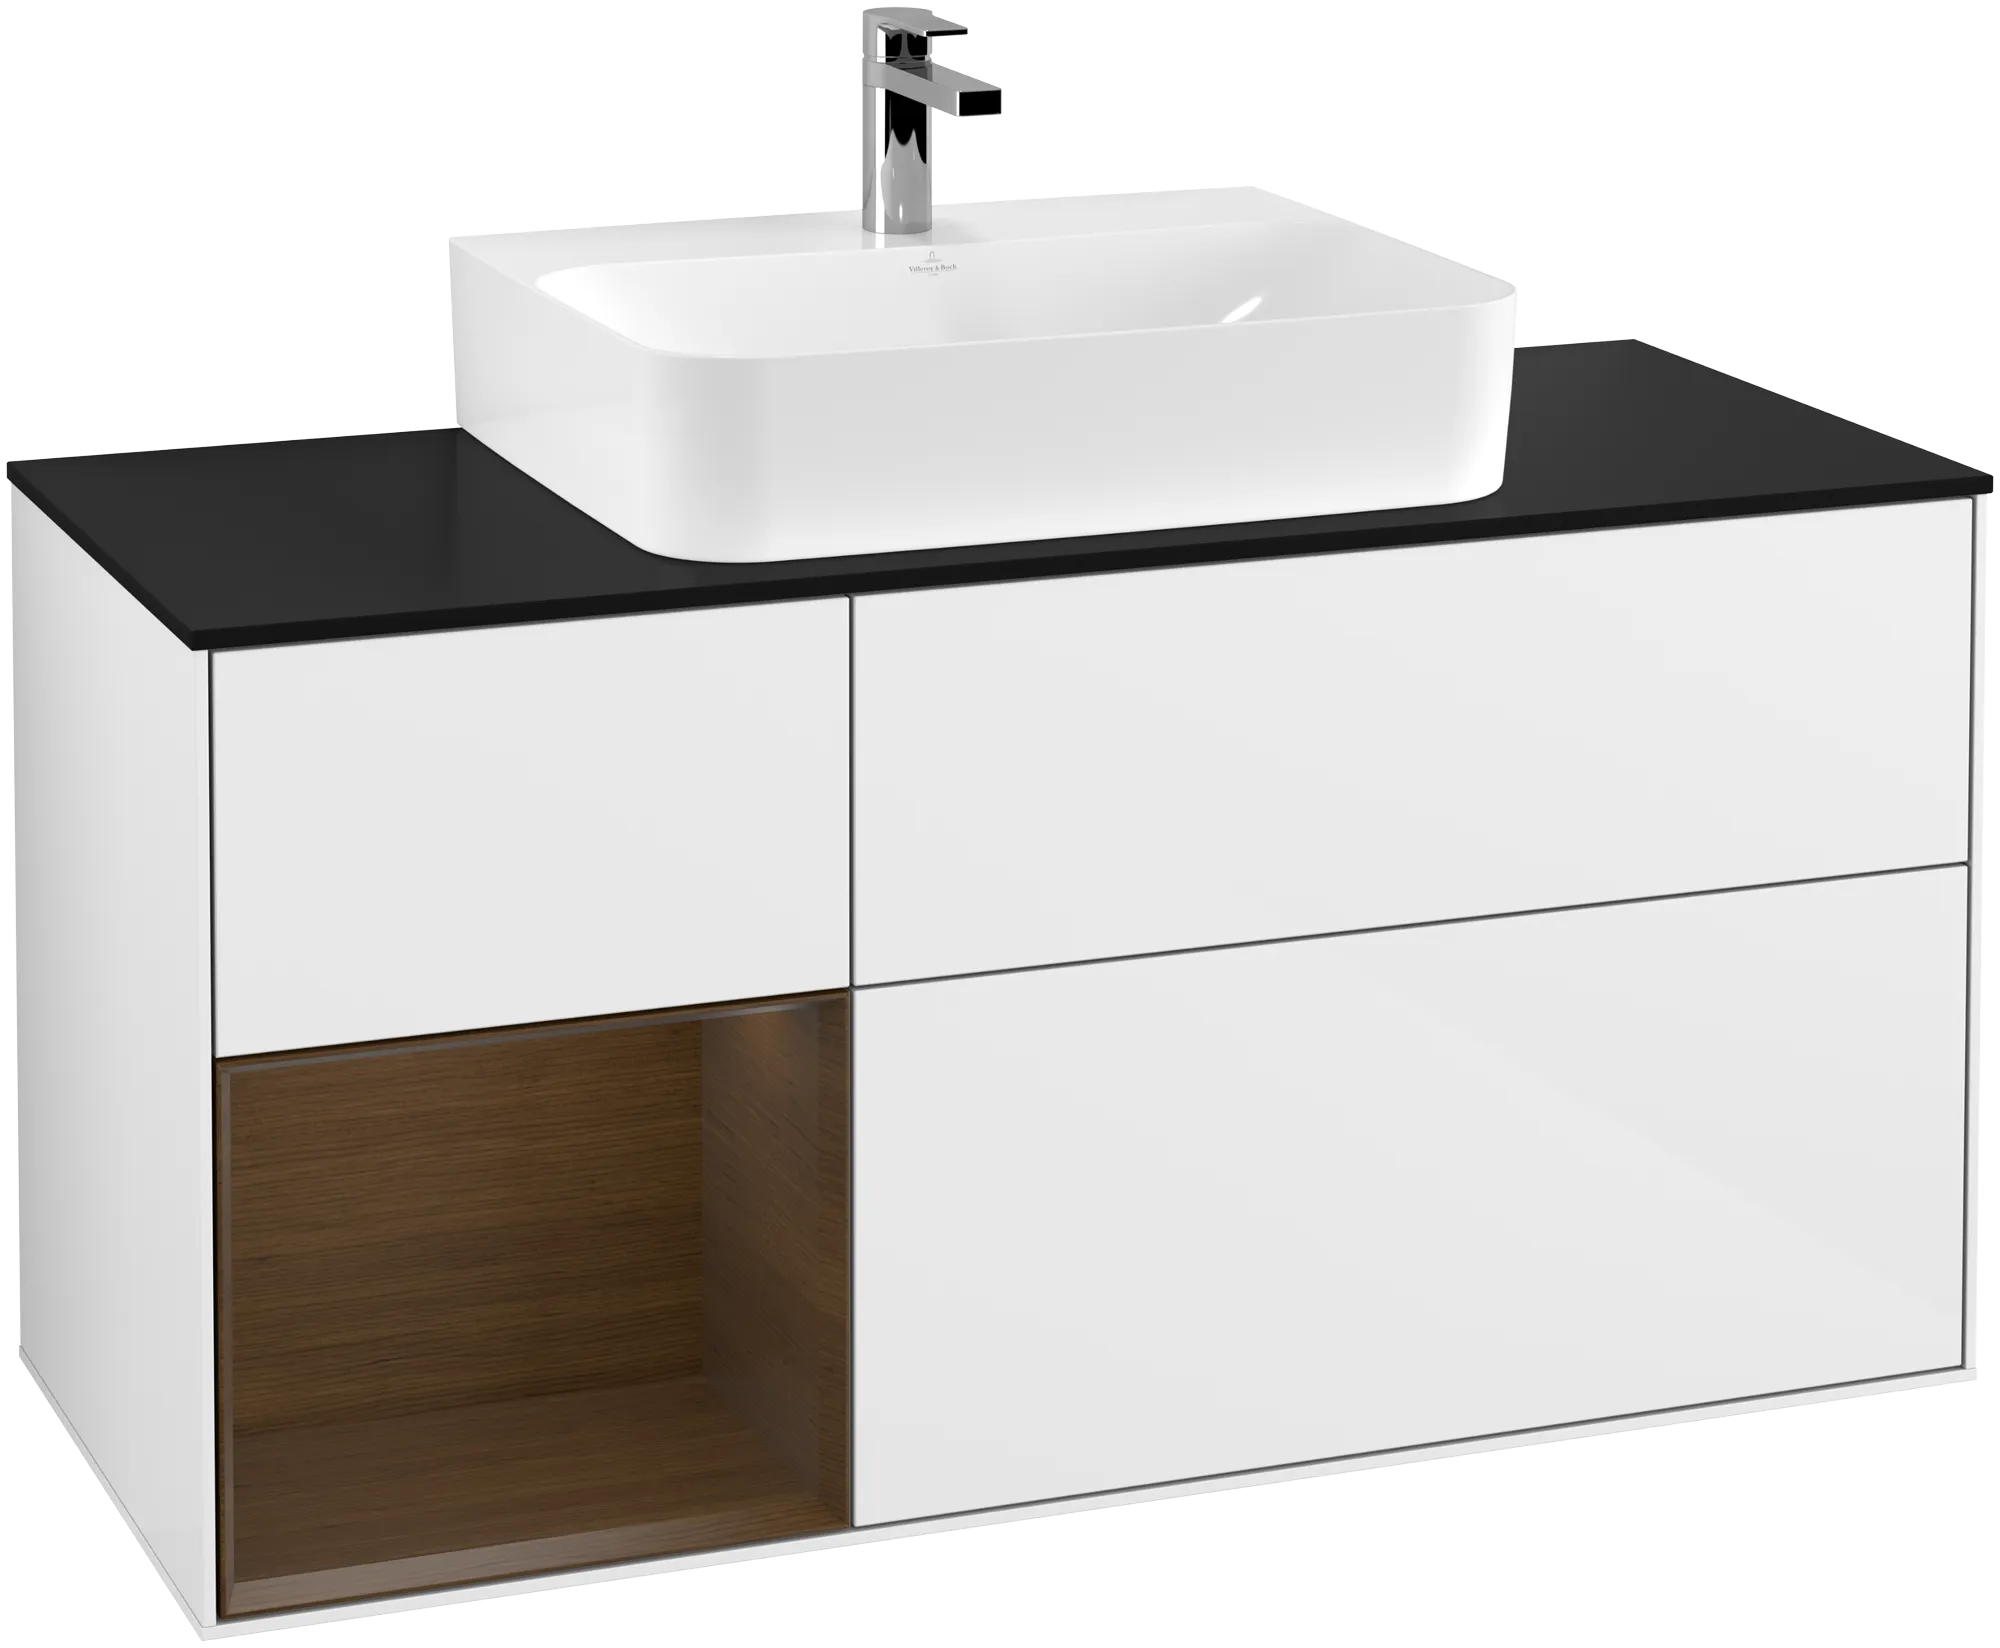 Picture of VILLEROY BOCH Finion Vanity unit, with lighting, 3 pull-out compartments, 1200 x 603 x 501 mm, Glossy White Lacquer / Walnut Veneer / Glass Black Matt #G162GNGF